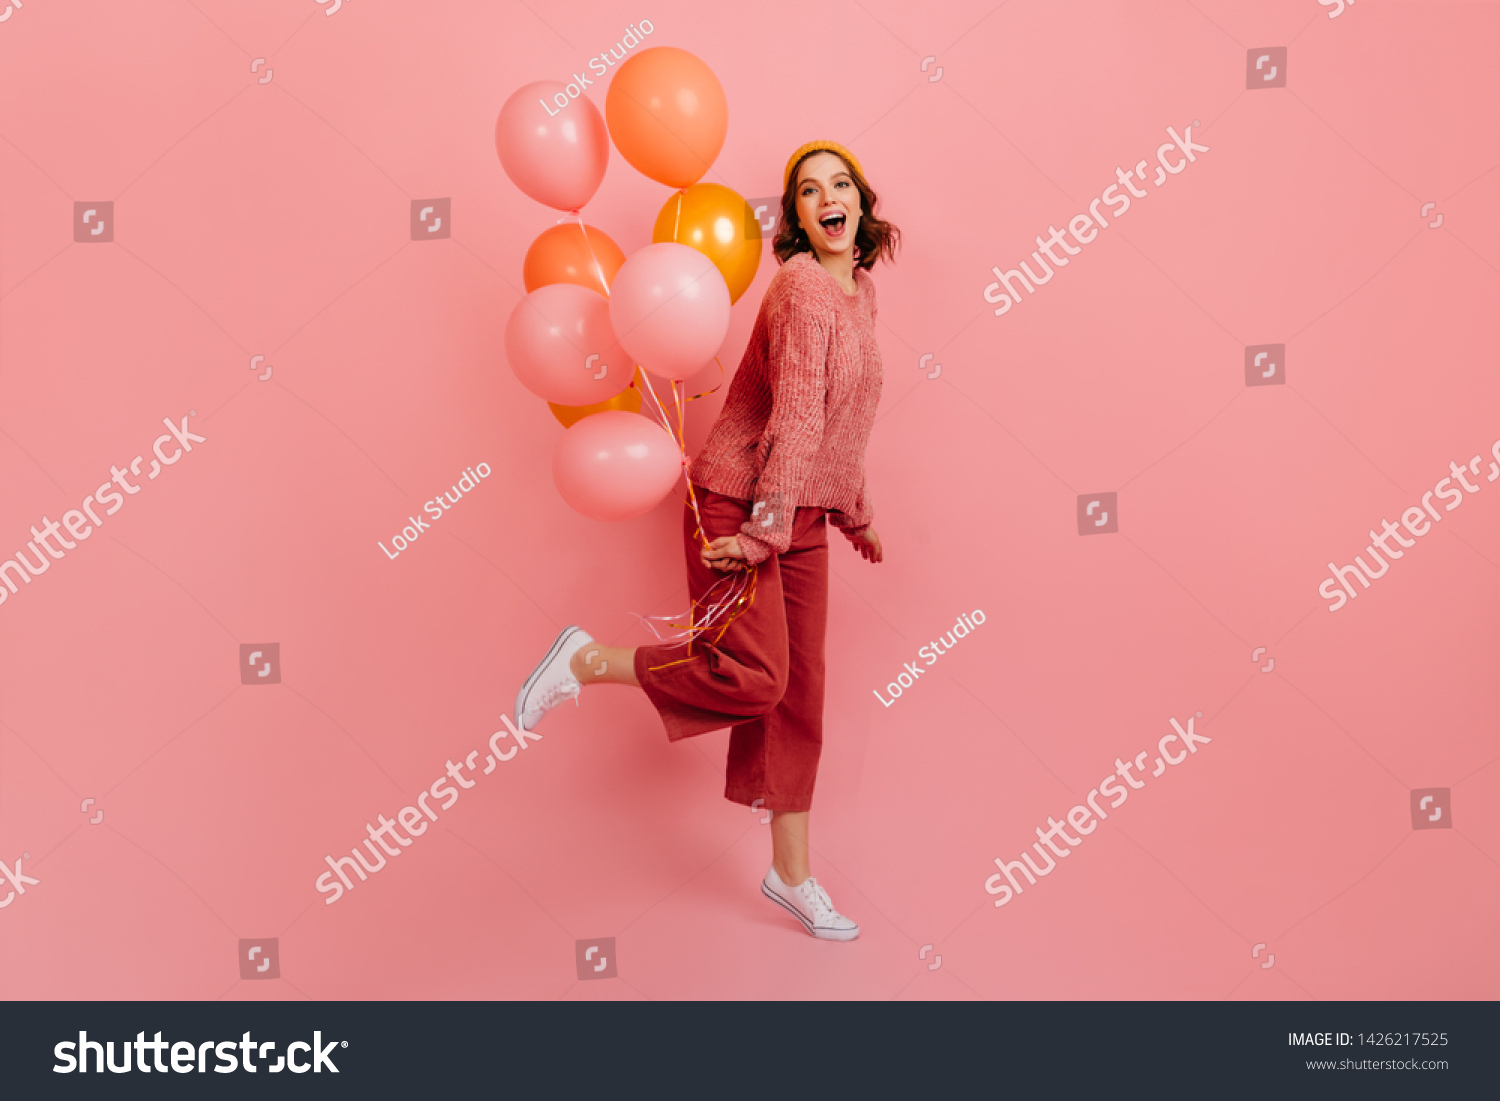 Full length view of joyful lady jumping with air balloons. Studio shot of laughing birthday girl posing on pink background. #1426217525